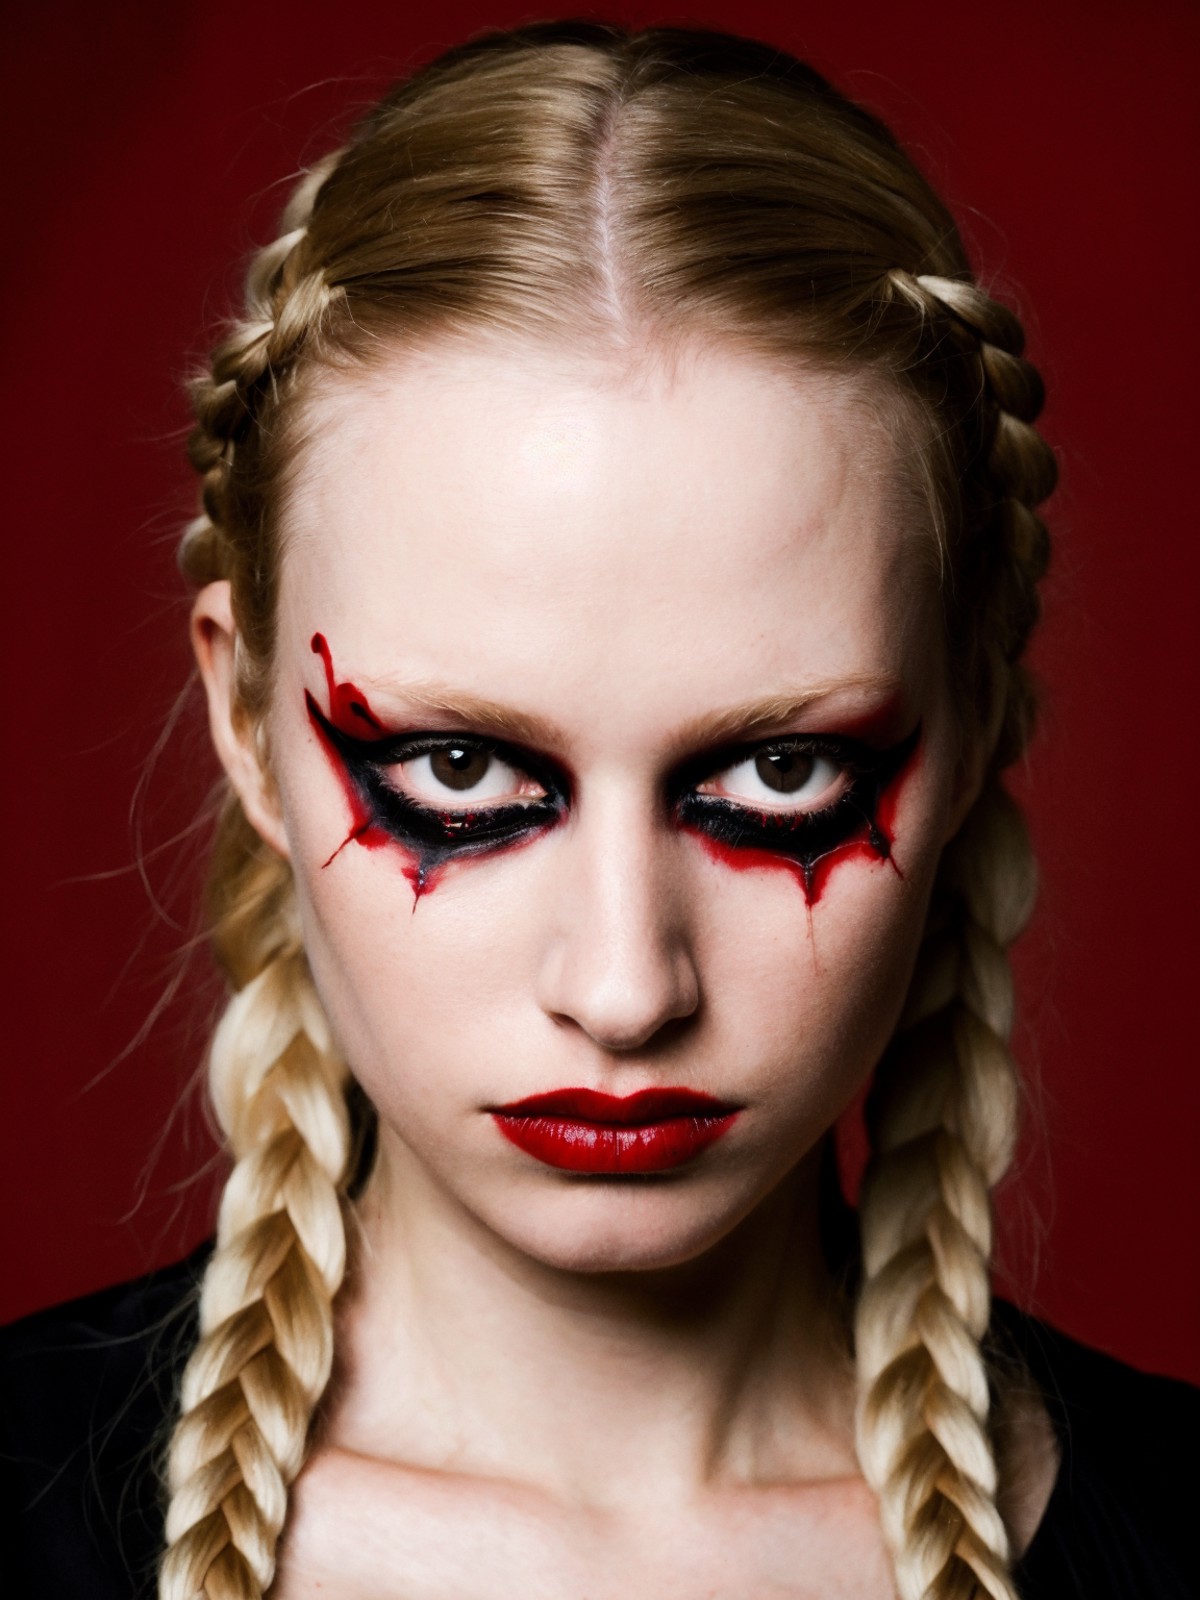 masterpieces, close-portrait, female, fantasy makeup, pale skin, blonde hair, braided hairstyle, mysterious, red black sym...